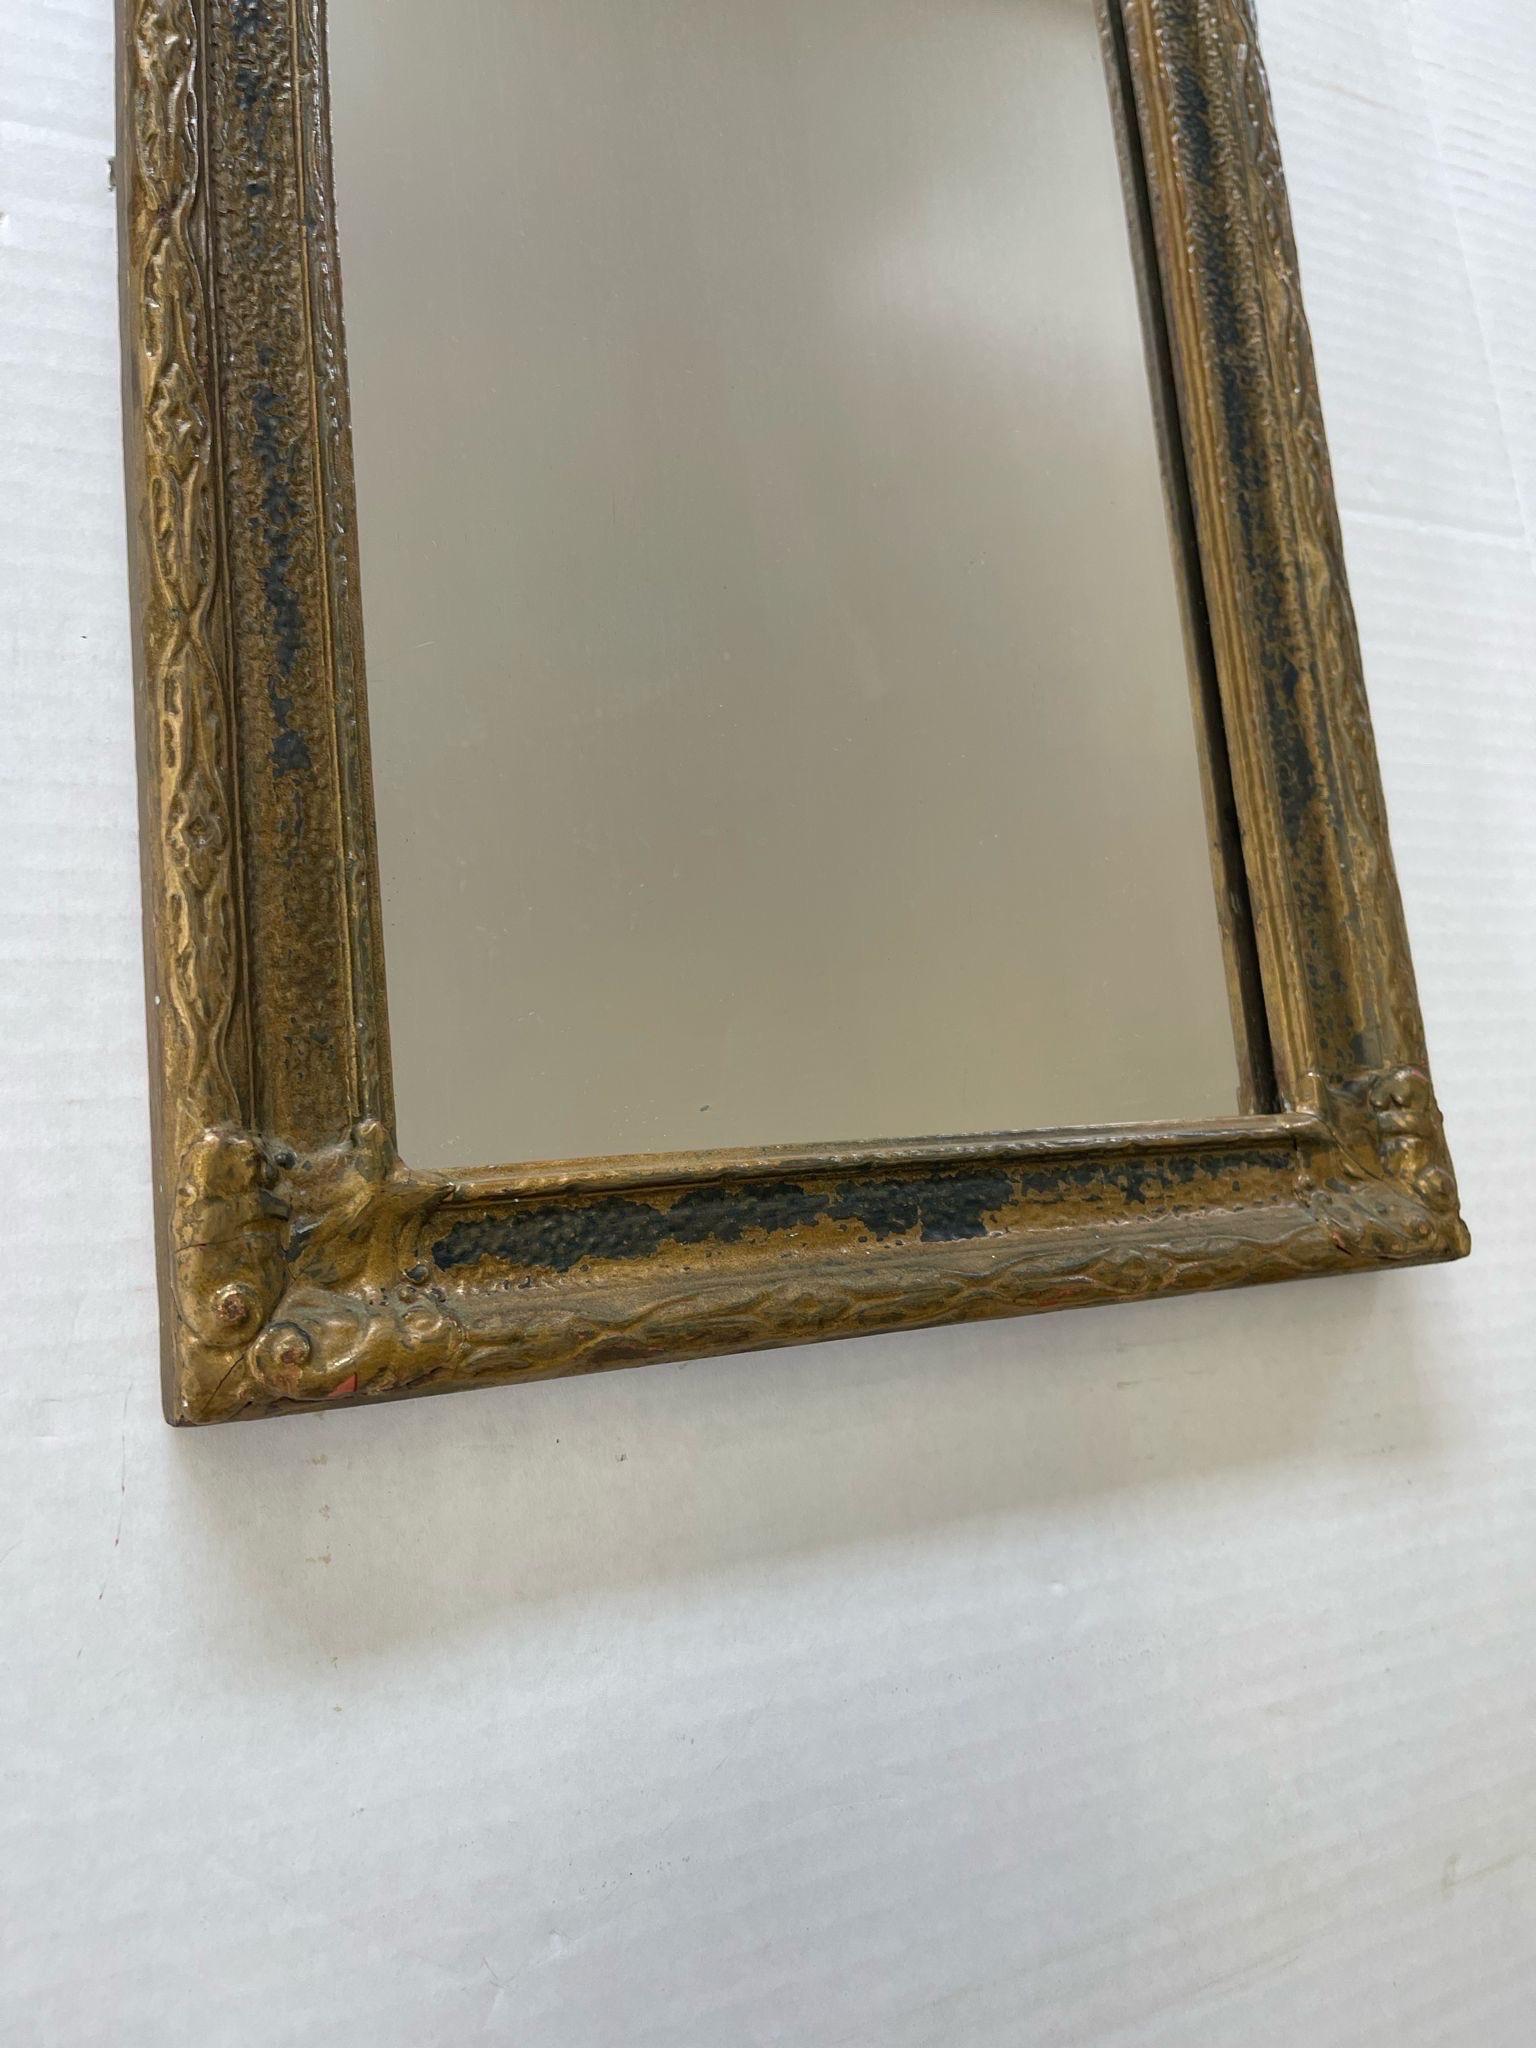 Glass Antique Arched Sculpted Wood Frame Mirror With Floral Etching. For Sale